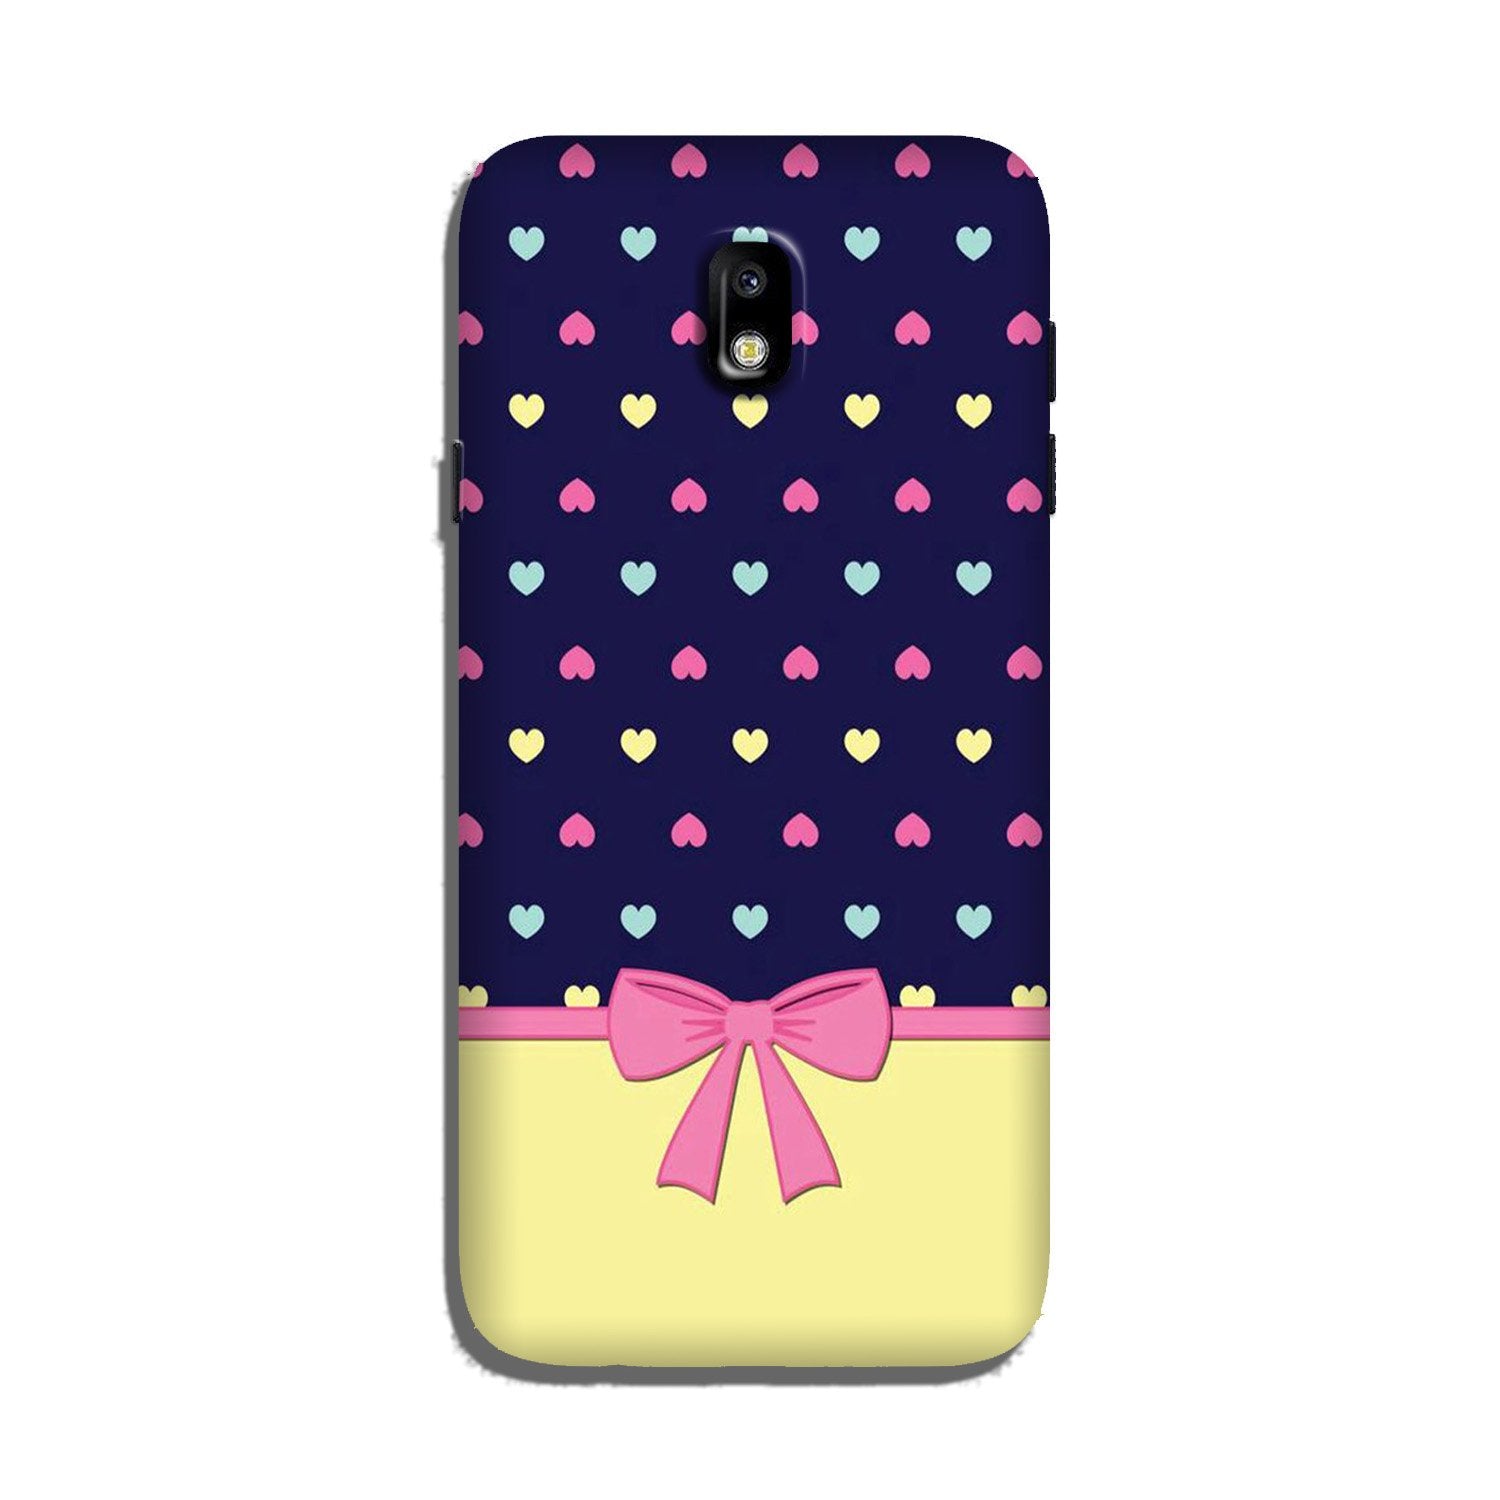 Gift Wrap5 Case for Galaxy J7 Pro